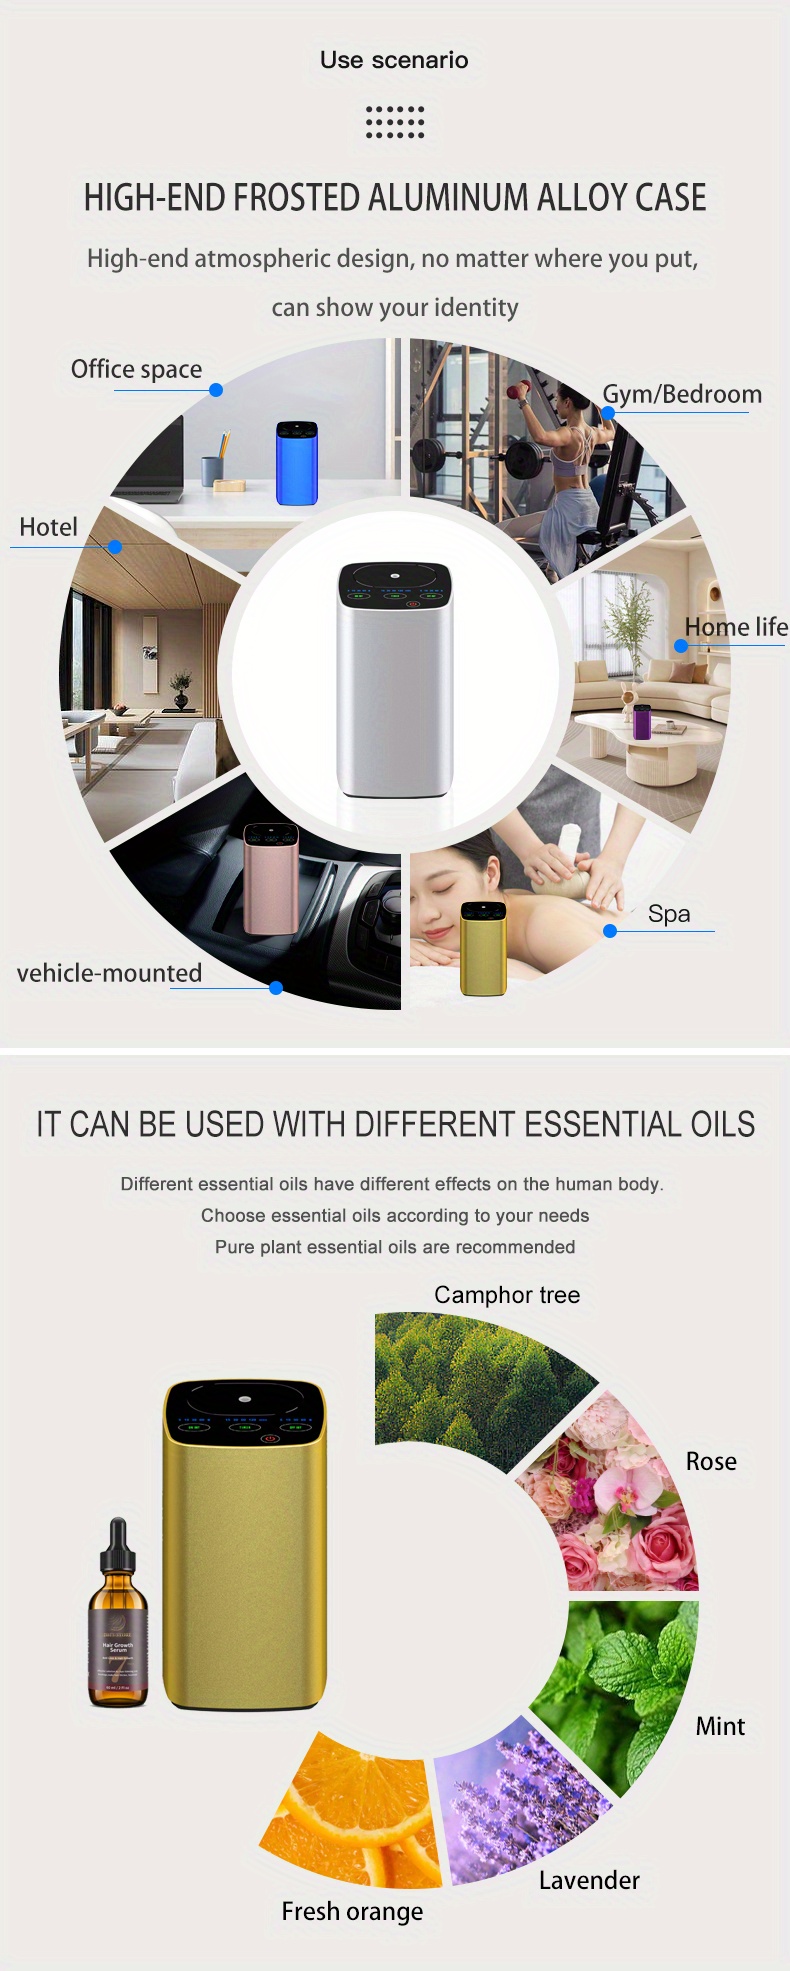 10ml aluminum alloy portable diffuser with memory mode and timing function for car office and bedroom enjoy pure essential oils anywhere details 9